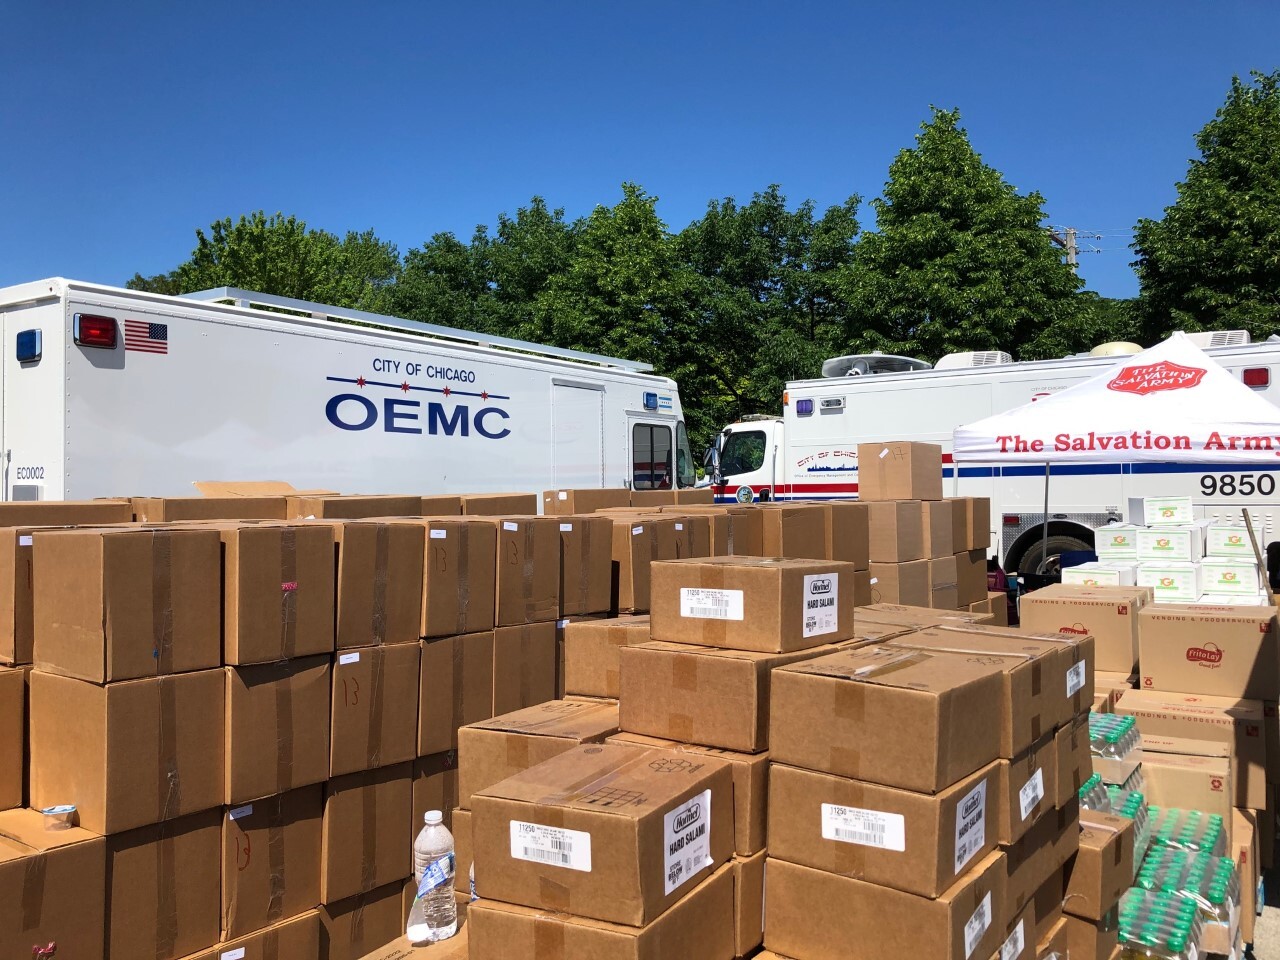 OEMC truck and many packed boxes